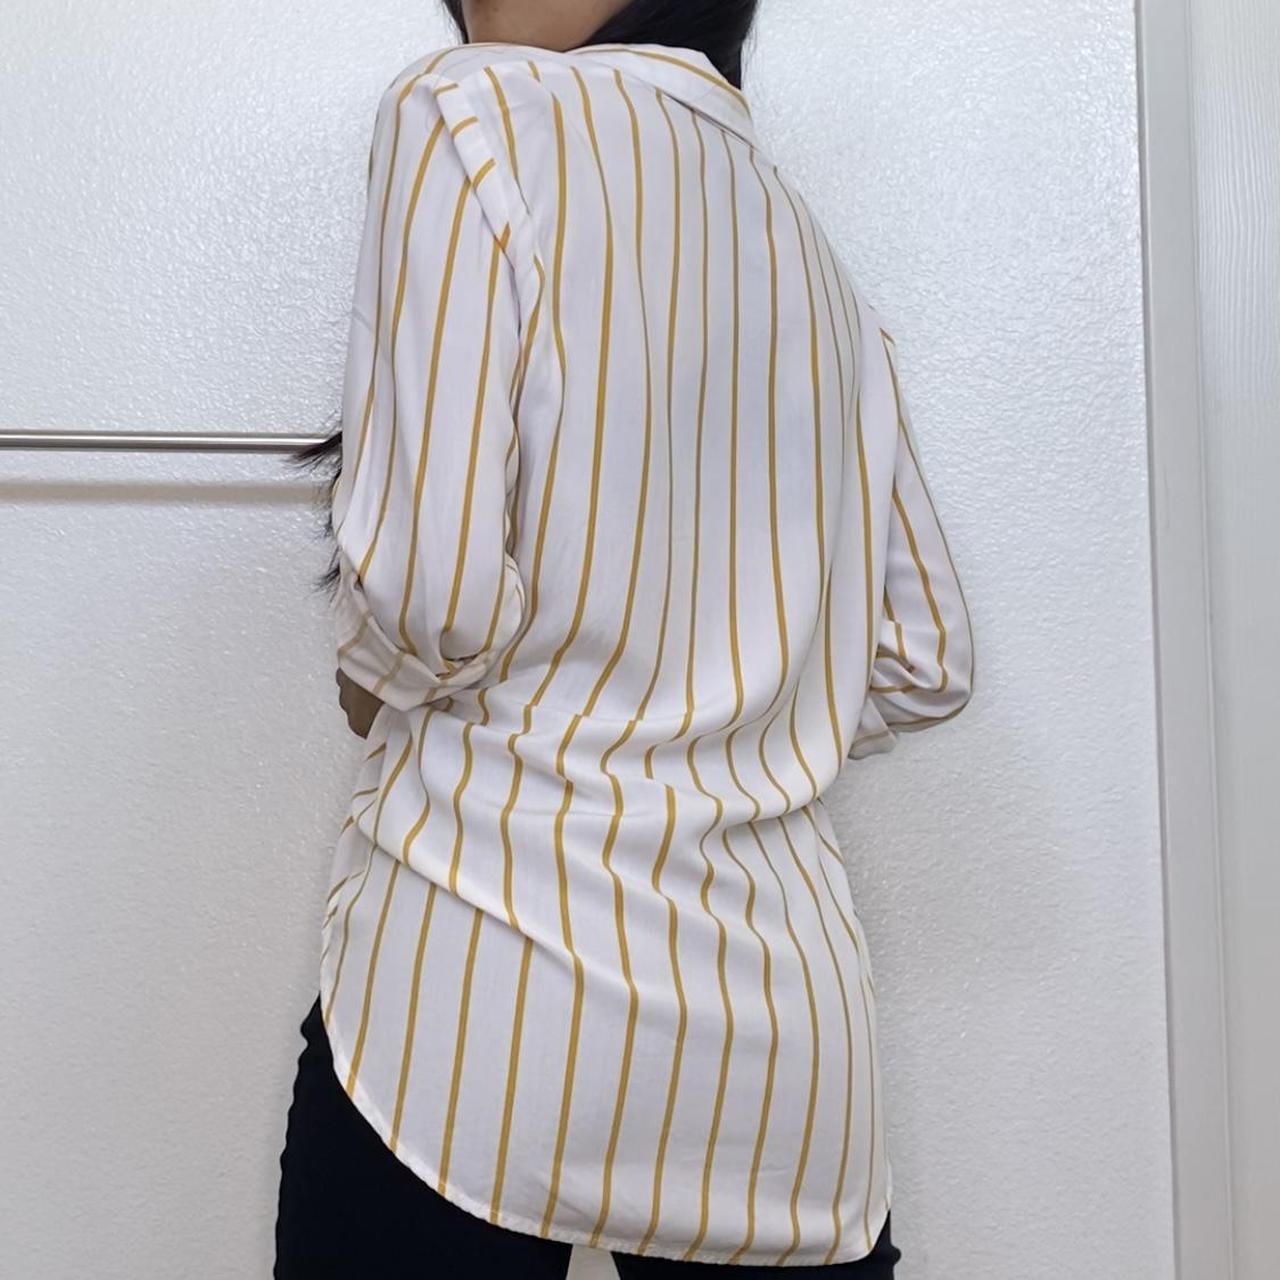 Product Image 3 - ☆ YELLOW STRIPED BUTTON UP